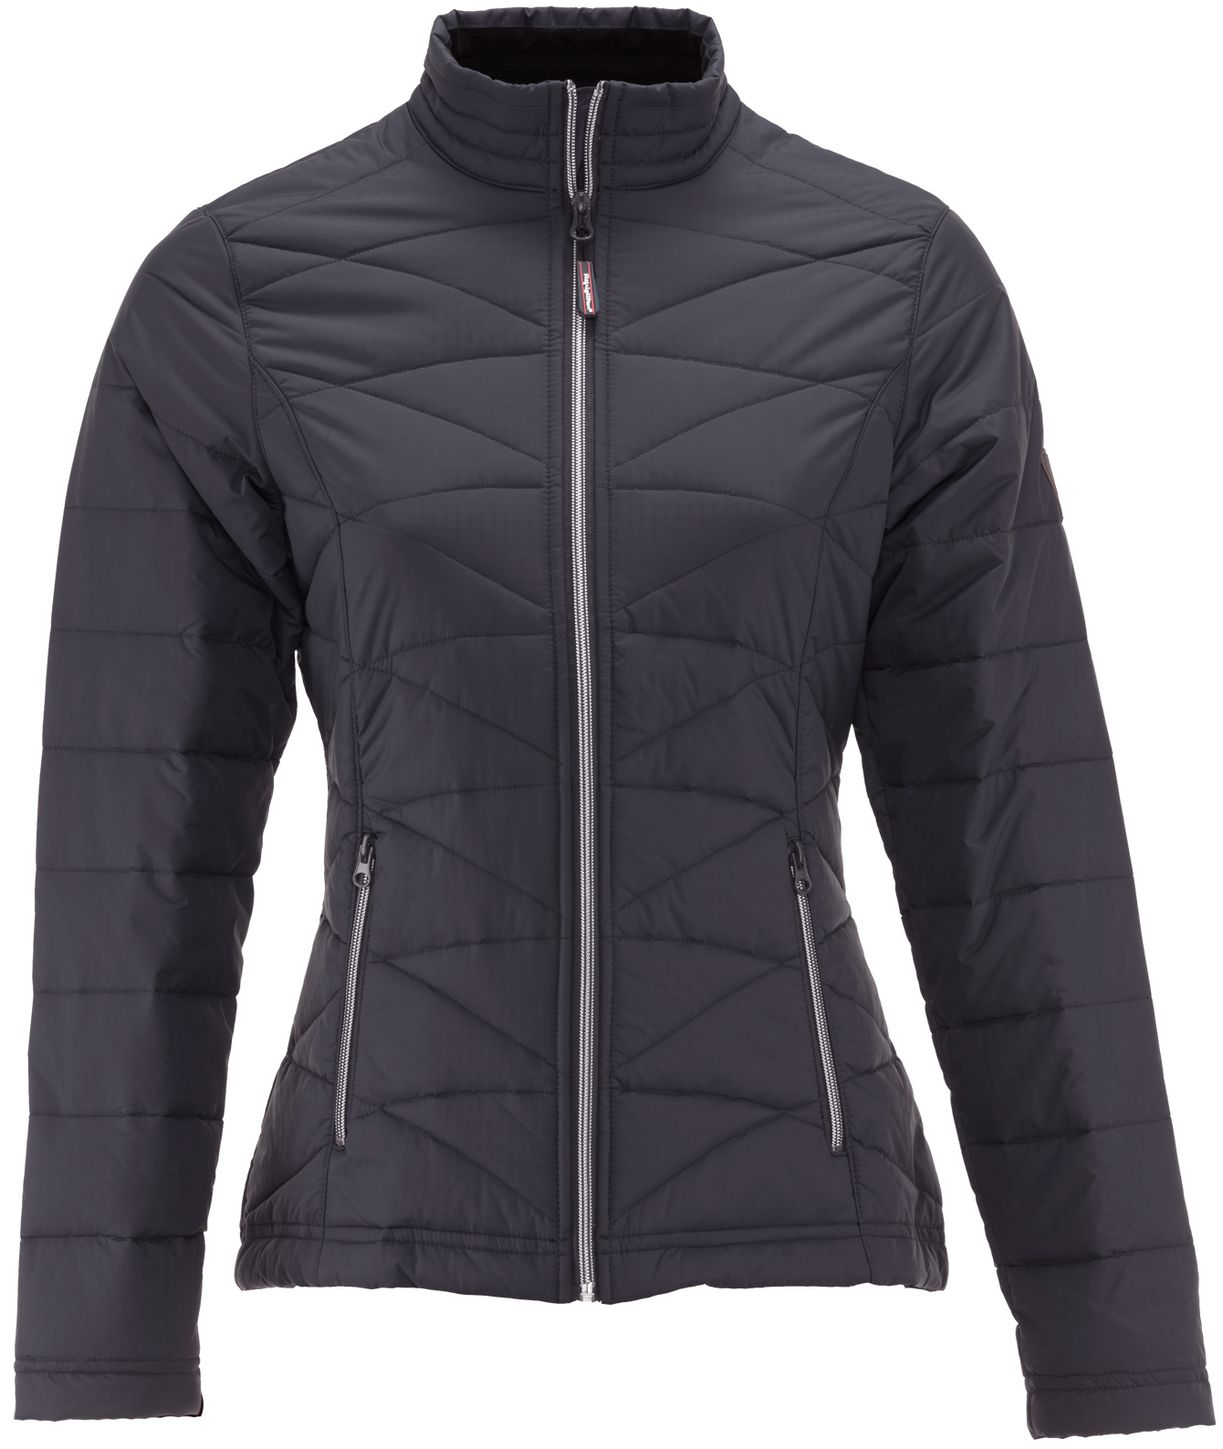 RefrigiWear 0423 Quilted Women's Insulated Work Jacket — Coat Size